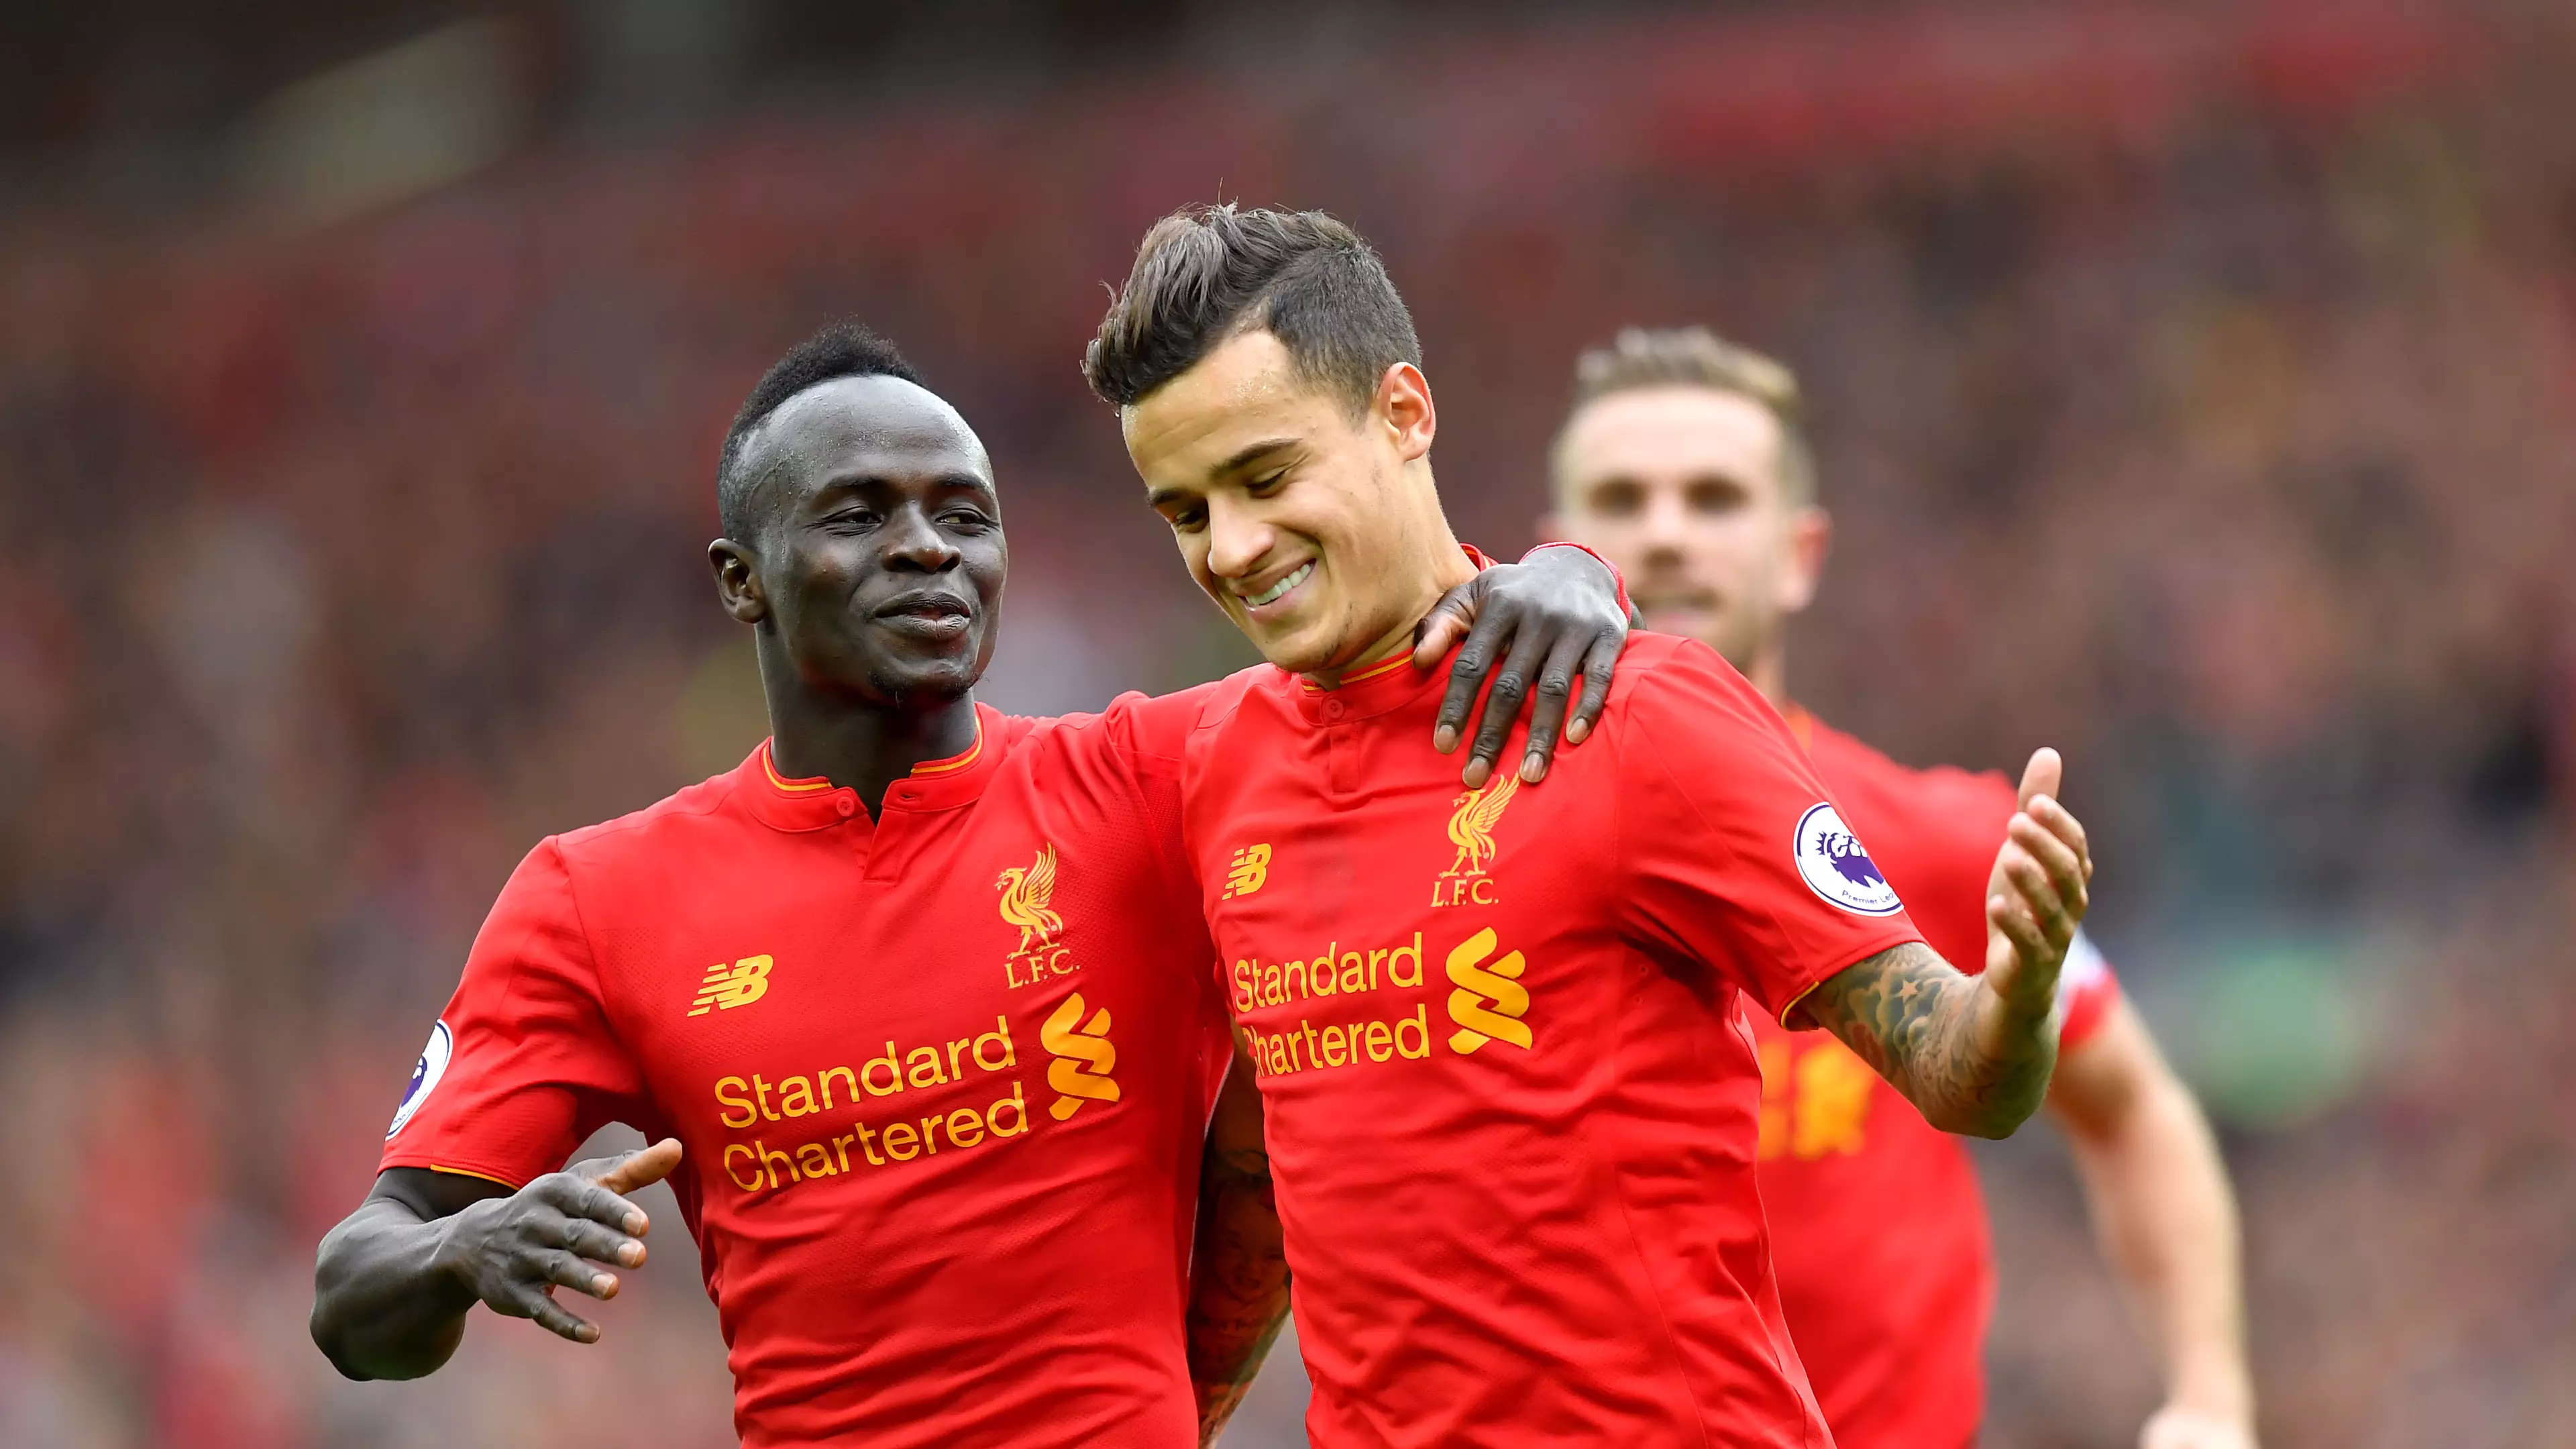 Coutinho Odds-On To Stay At Anfield This Summer According To Bookies